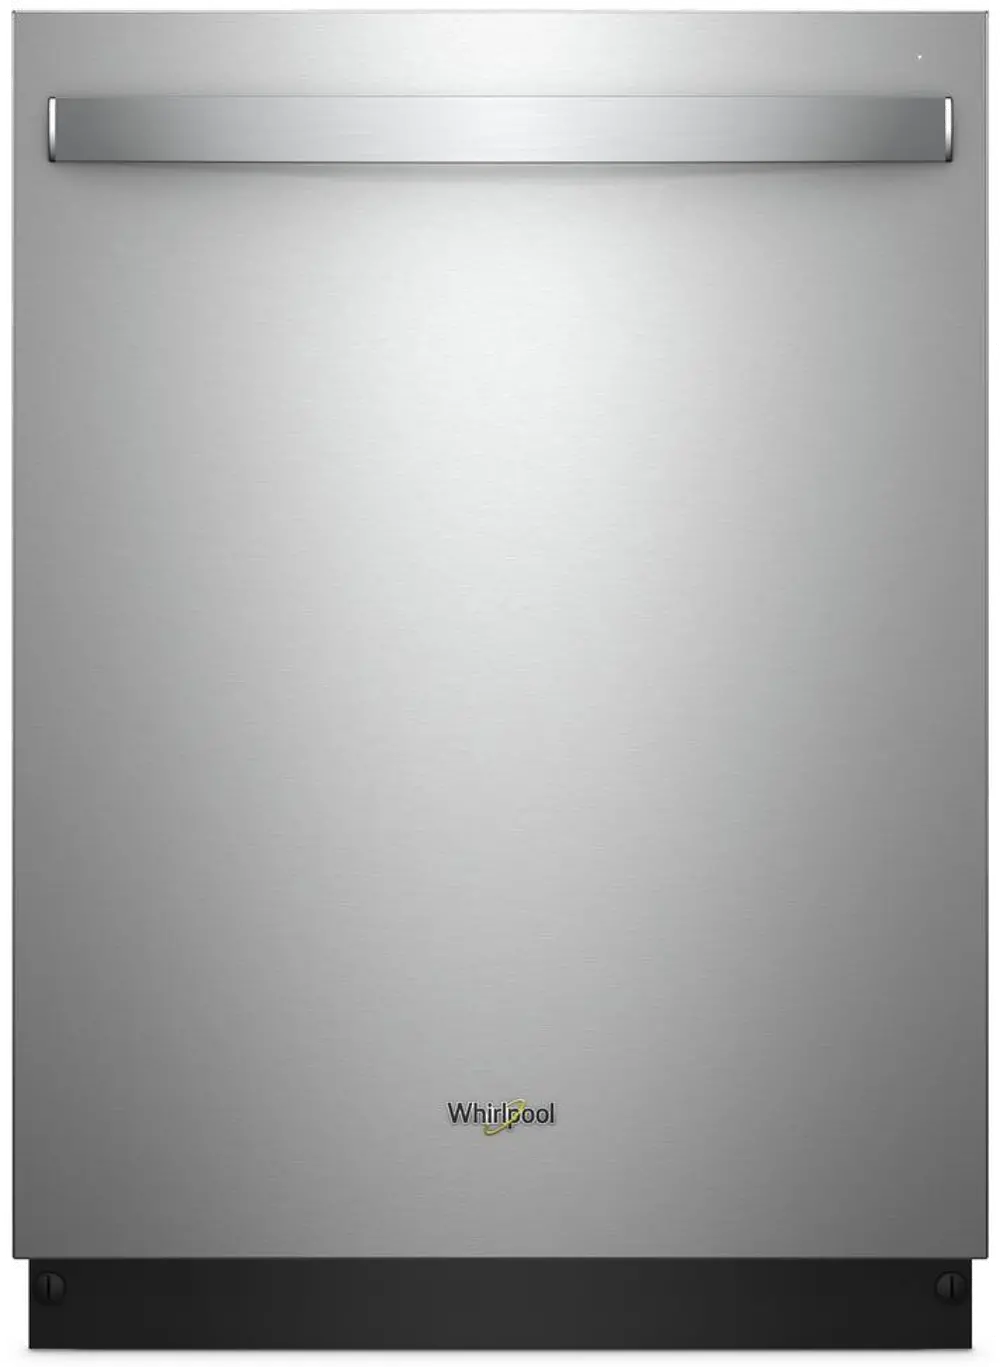 WDT970SAHZ Whirlpool Dishwasher with Third Level Rack - Fingerprint Resistant Stainless Steel-1